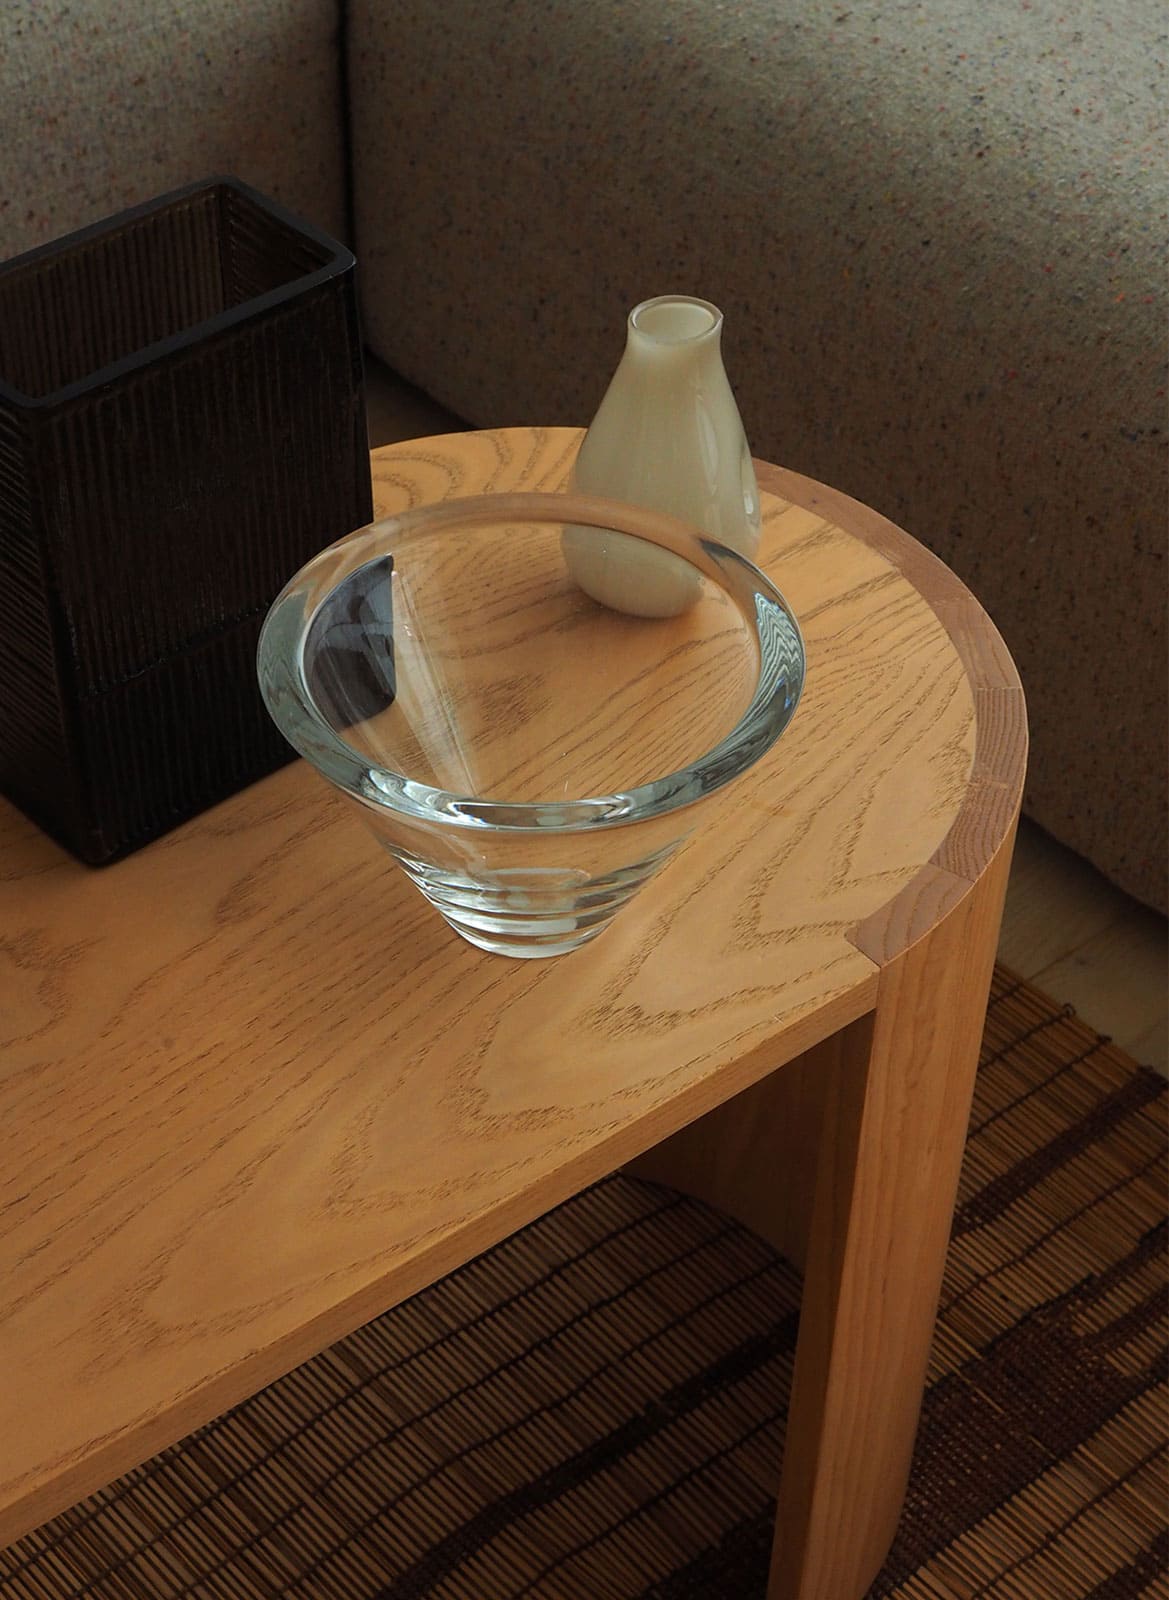 Simple glass bowl made by artist Hanne Dreutler standing on a wooden table